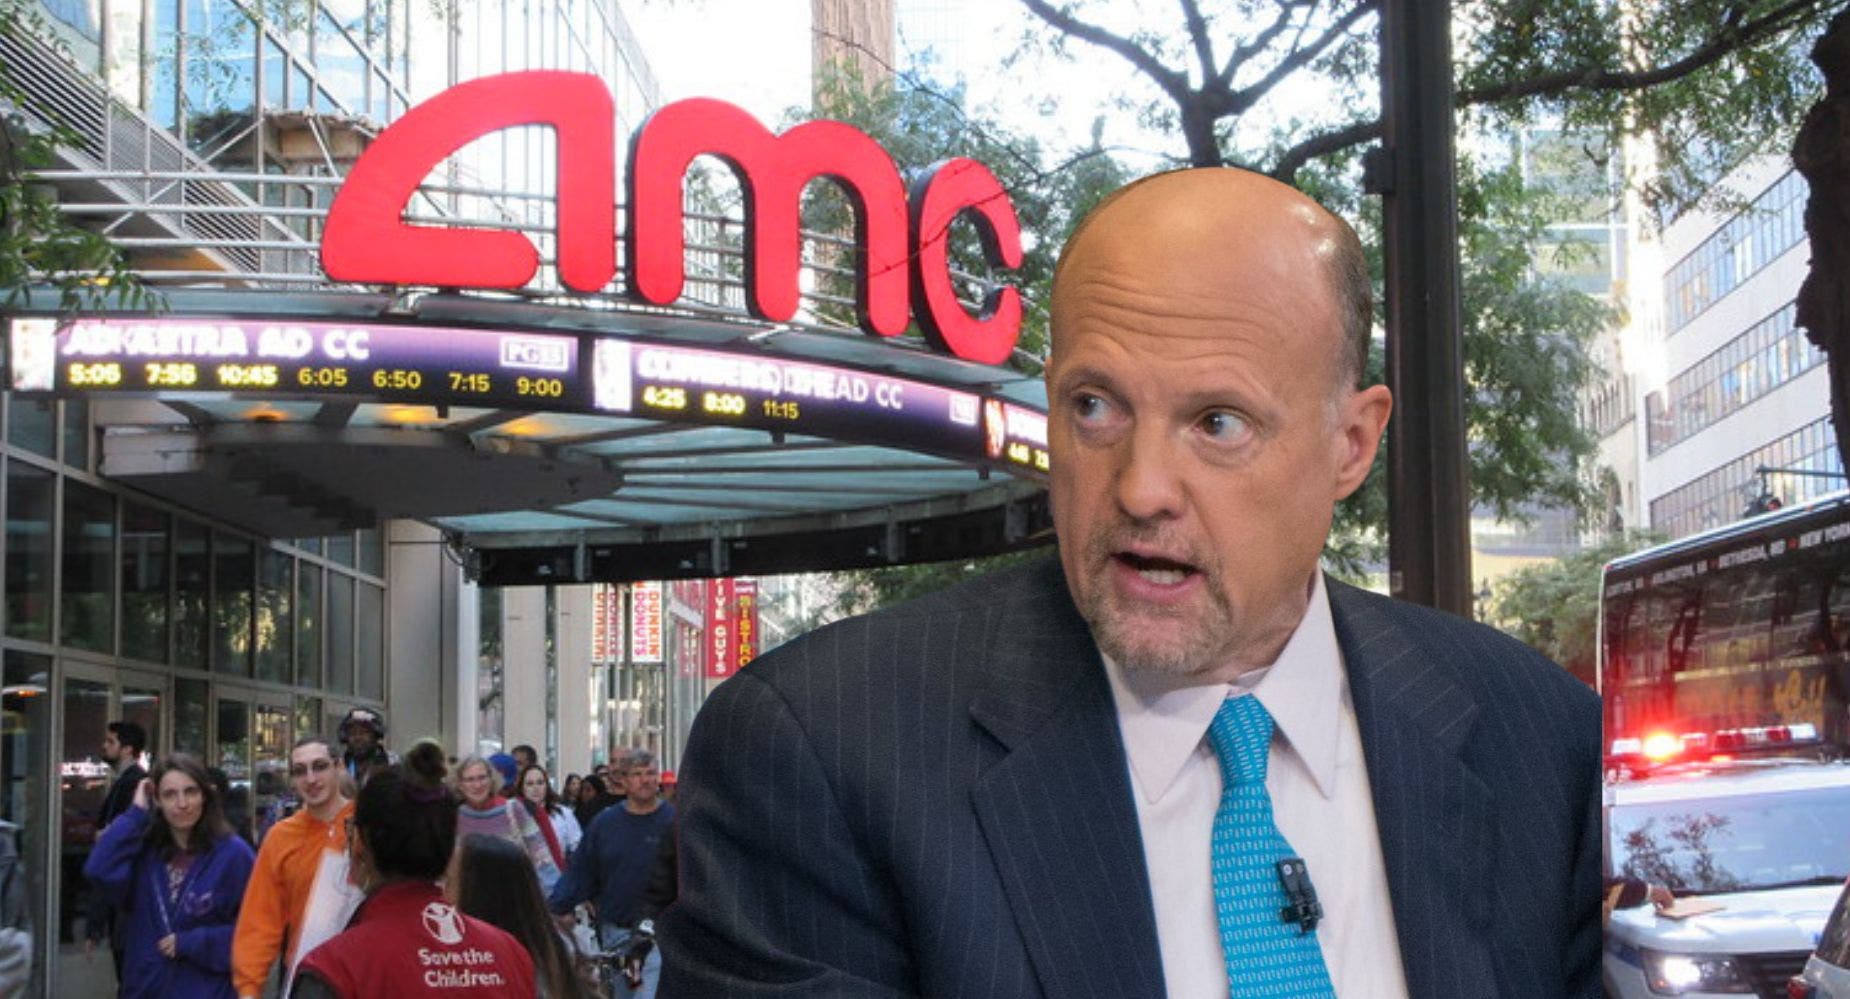 Jim Cramer Is Retiring Apes For Good: His On-Again, Off-Again Relationship With AMC Investors